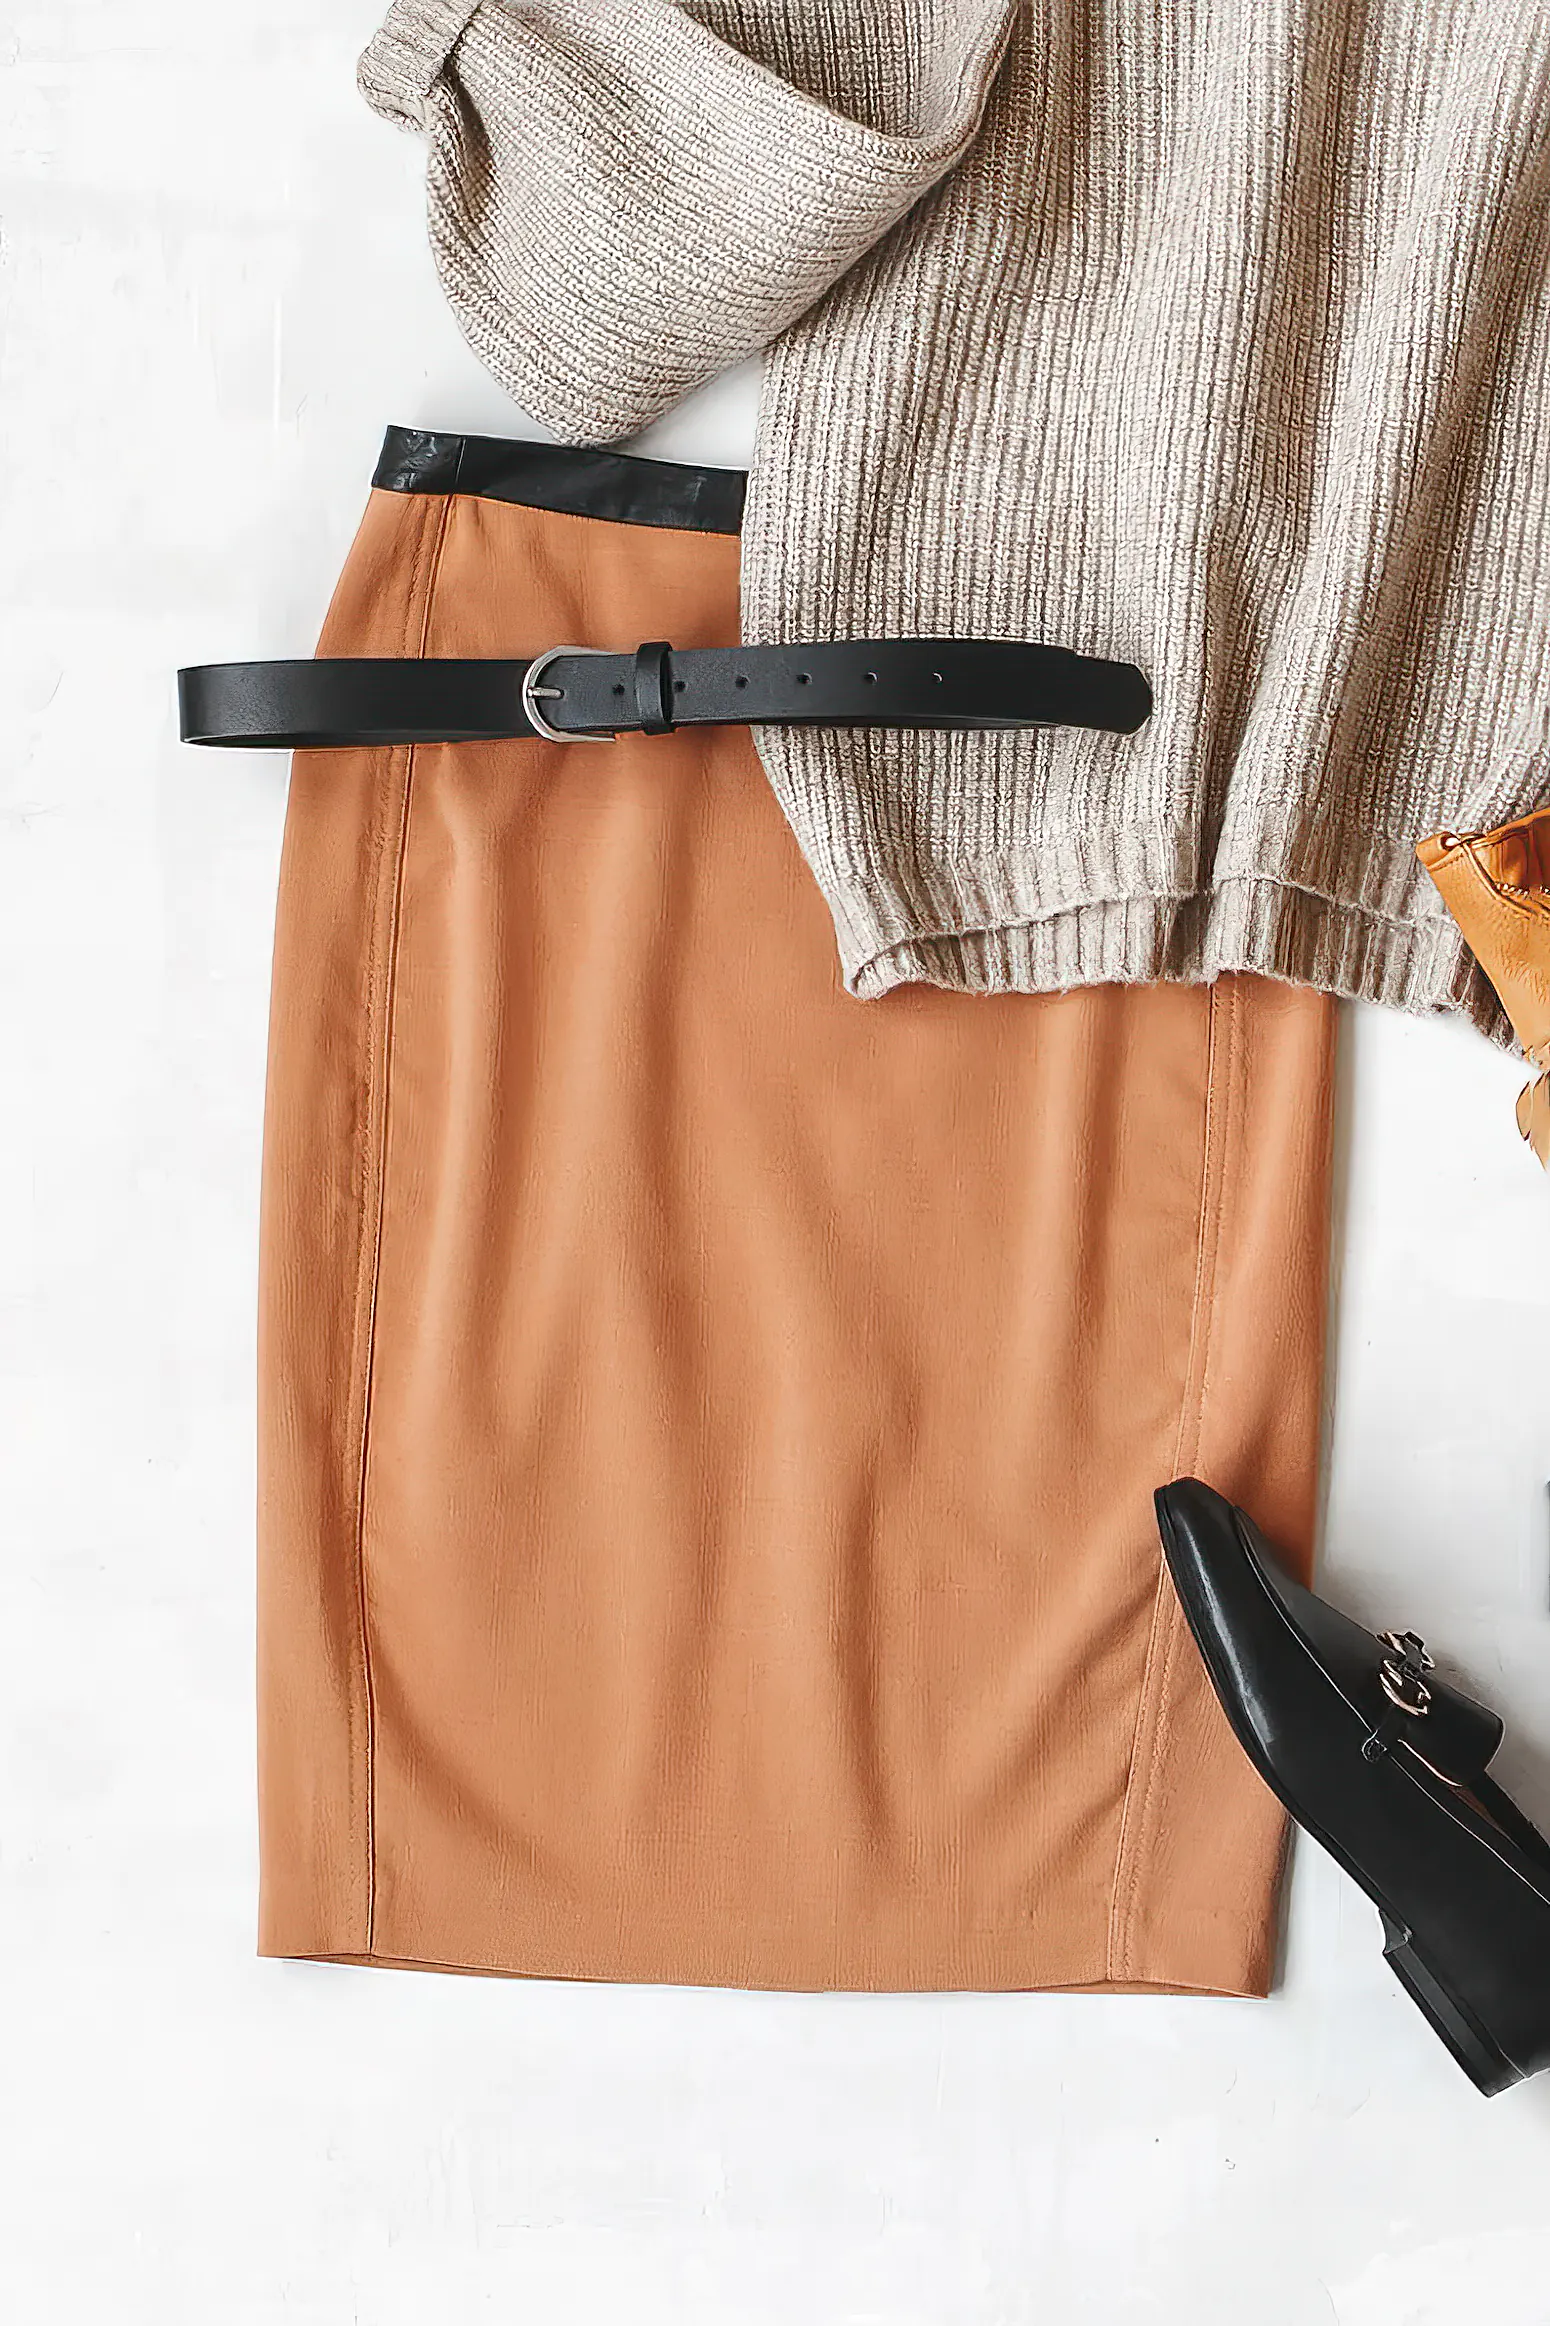 Brown midi pencil skirt, beige knitted oversize sweater, bag, belt, black loafers or flat shoes on grey background